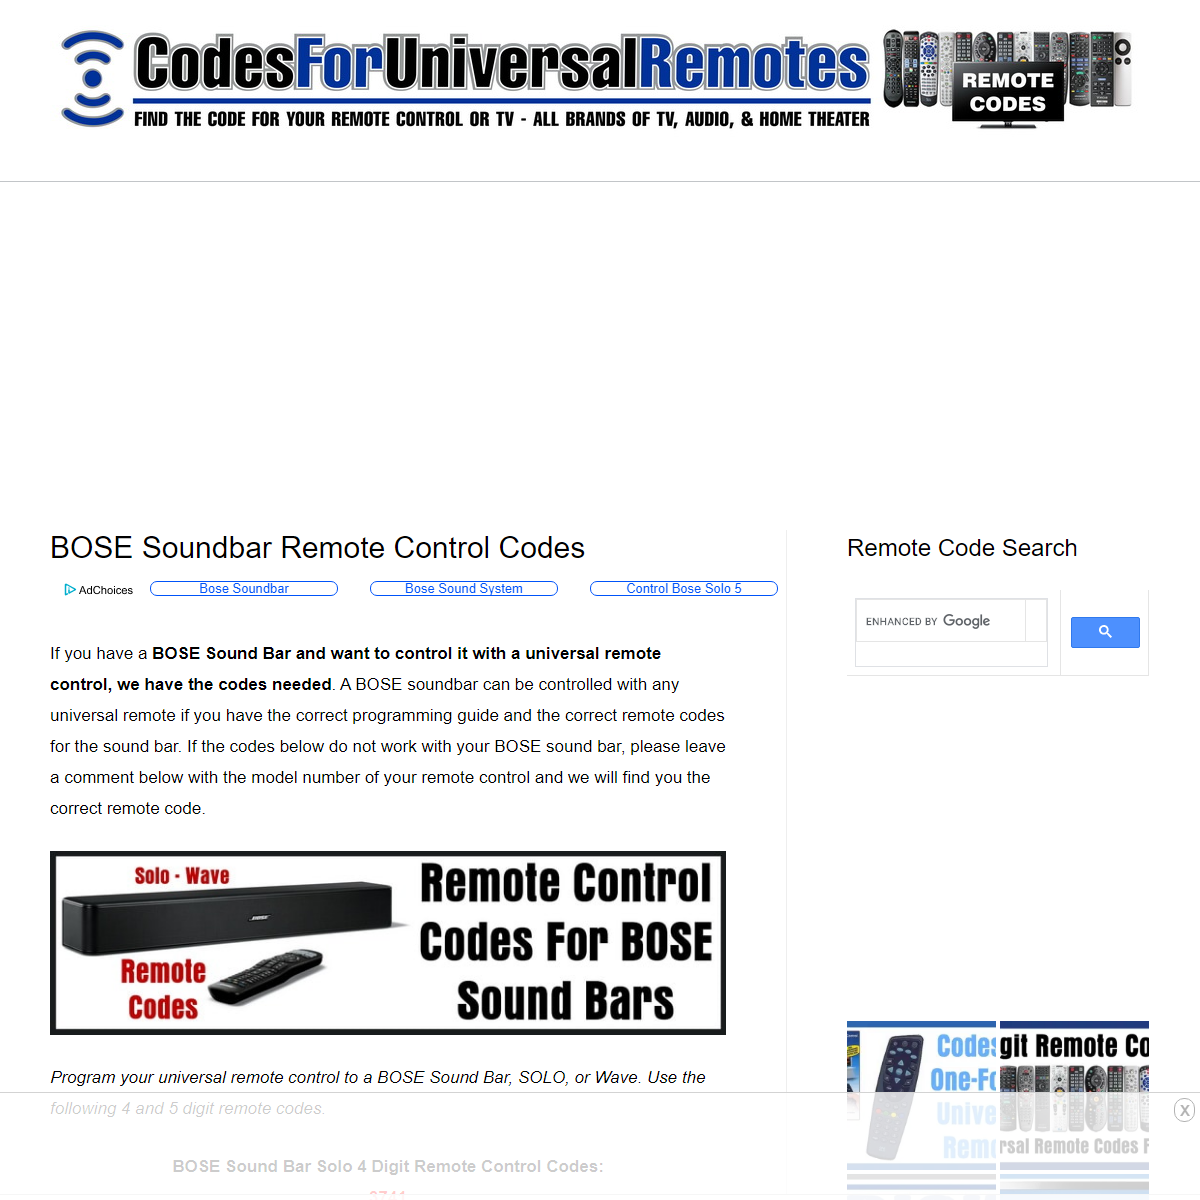 A complete backup of https://codesforuniversalremotes.com/remote-control-codes-for-bose-sound-bars-solo-wave/